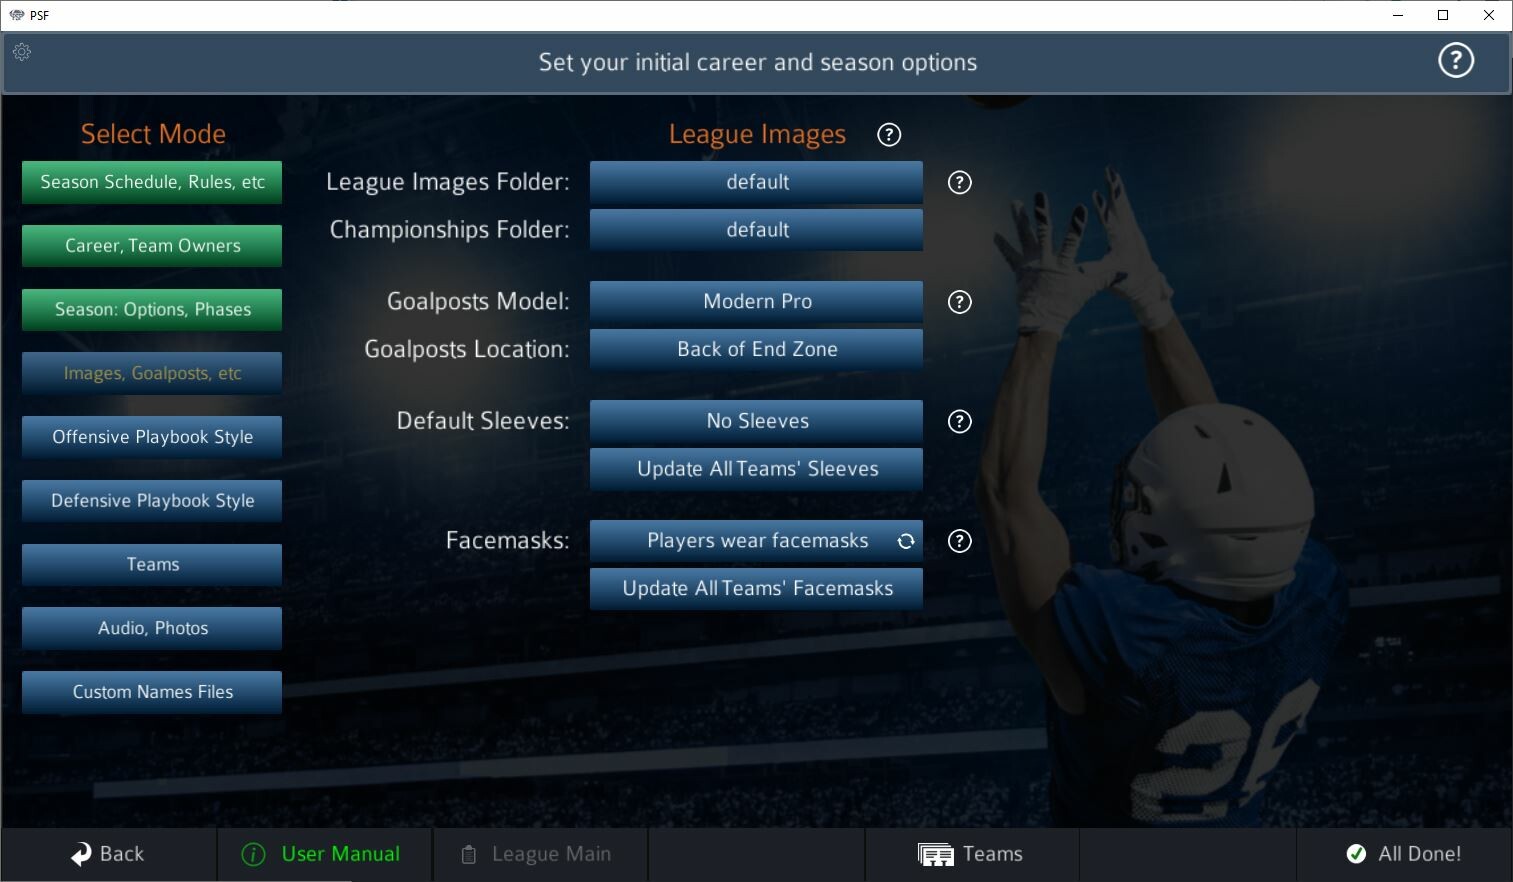 Pro Strategy Football 2023 Free Download